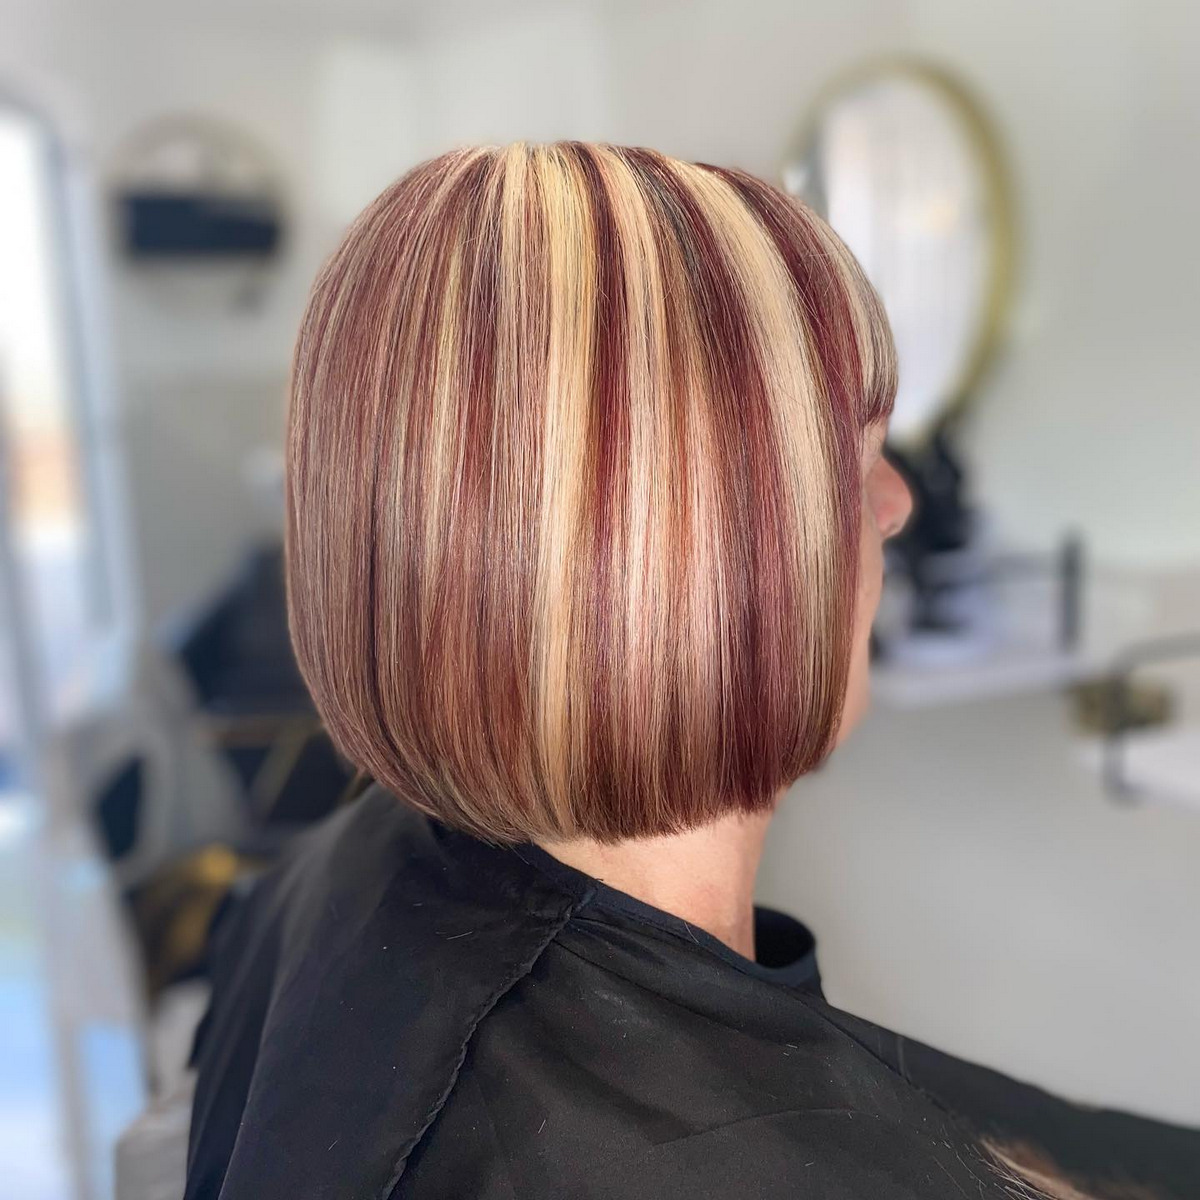 Short Blonde Bob Hairstyle With Red Wine Highlight